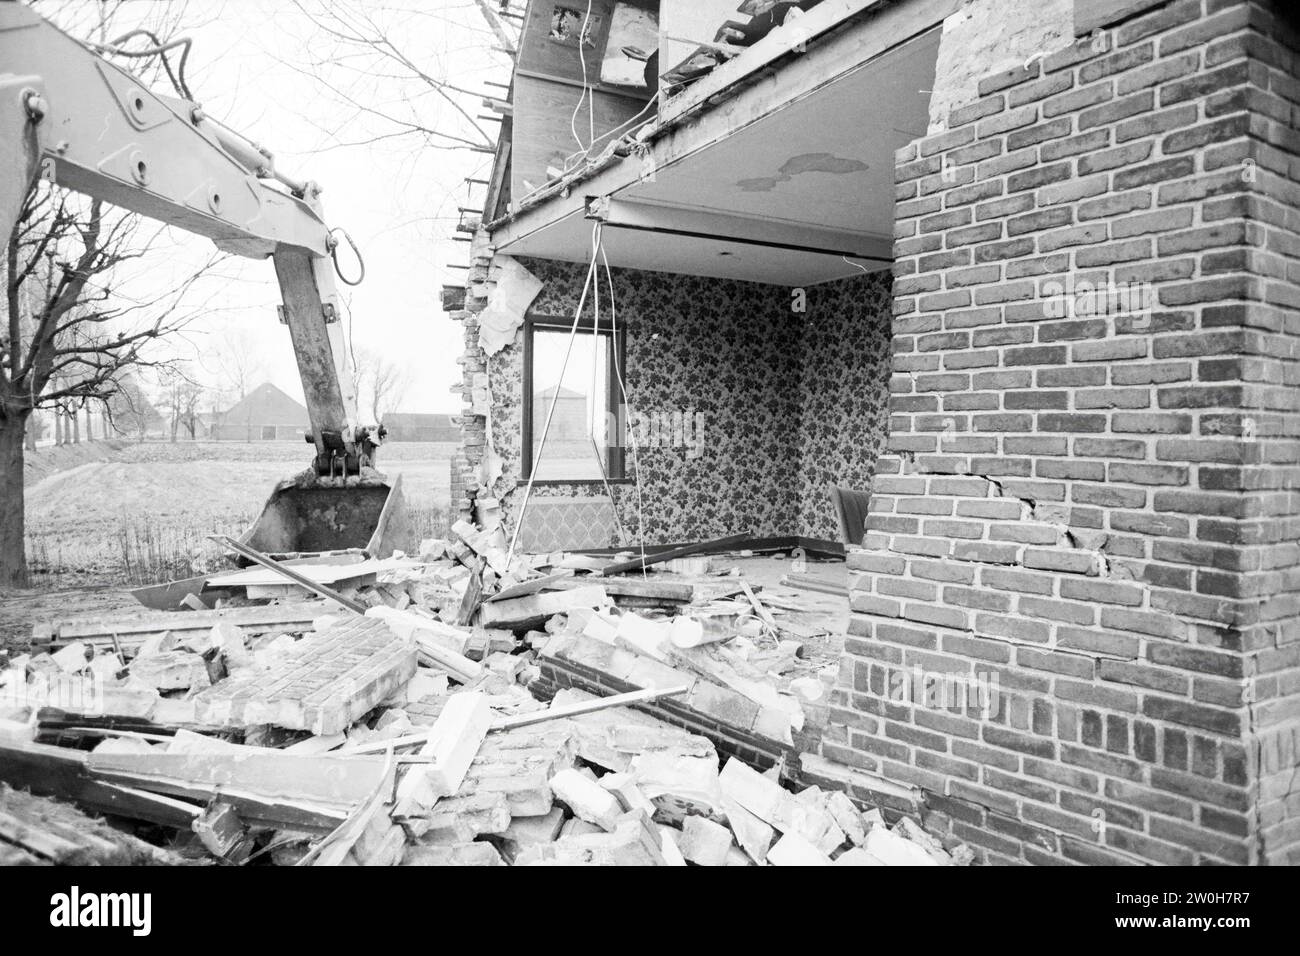 Demolition house Rijnlanderweg, De Hoek, Hoofddorp, Houses and house construction, Demolition, demolition, demolition yards, Hoofddorp, Rijnlanderweg, The Netherlands, 19-11-1981, Whizgle News from the Past, Tailored for the Future. Explore historical narratives, Dutch The Netherlands agency image with a modern perspective, bridging the gap between yesterday's events and tomorrow's insights. A timeless journey shaping the stories that shape our future. Stock Photo